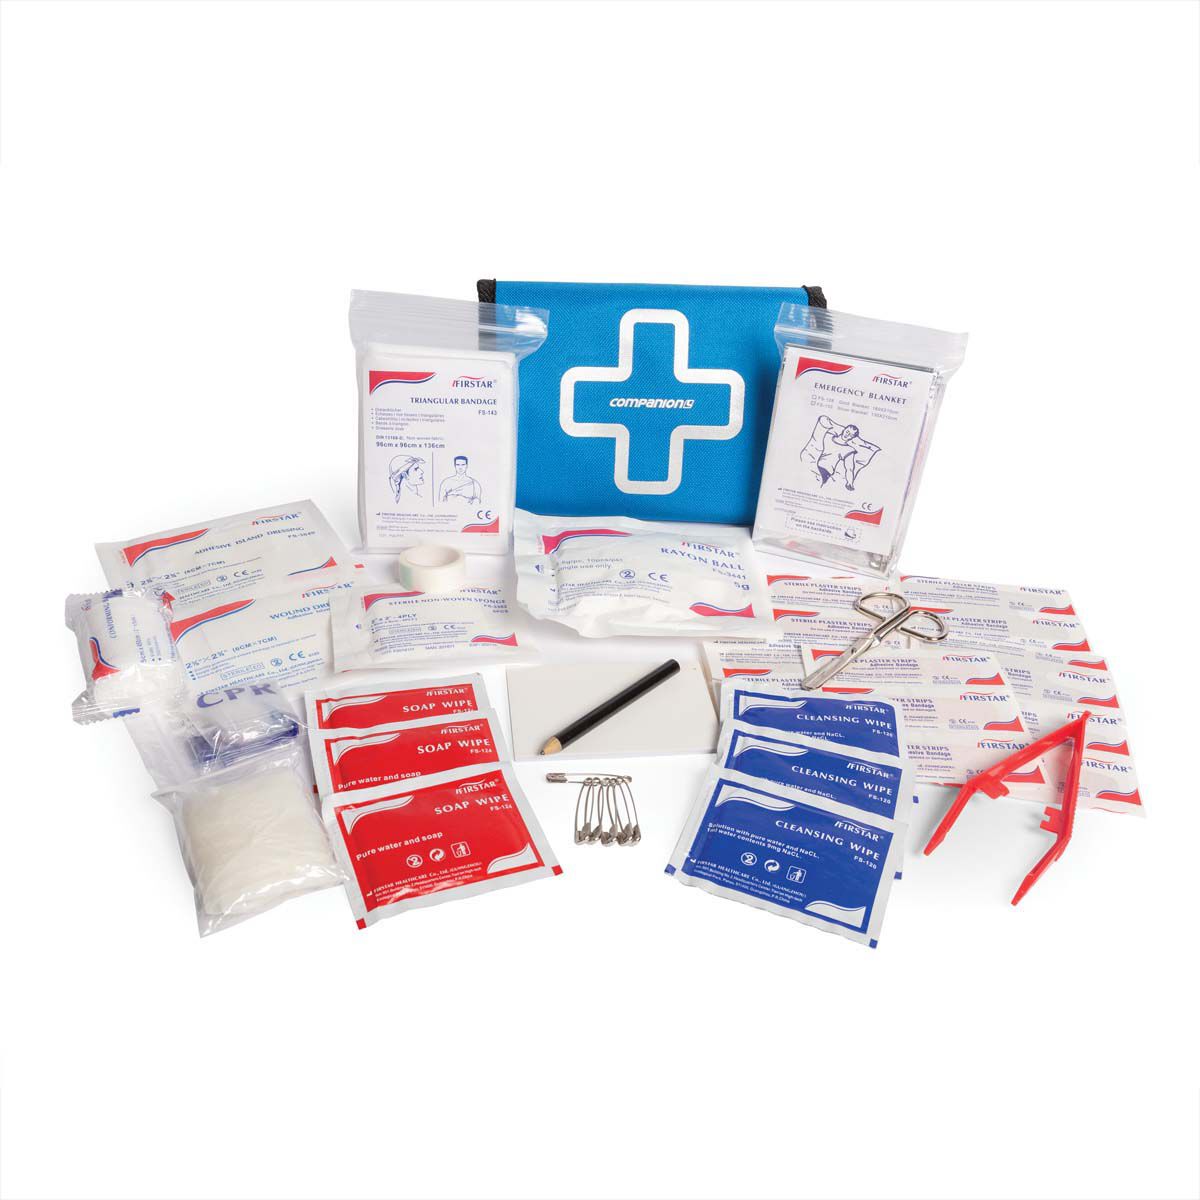 materials in first aid